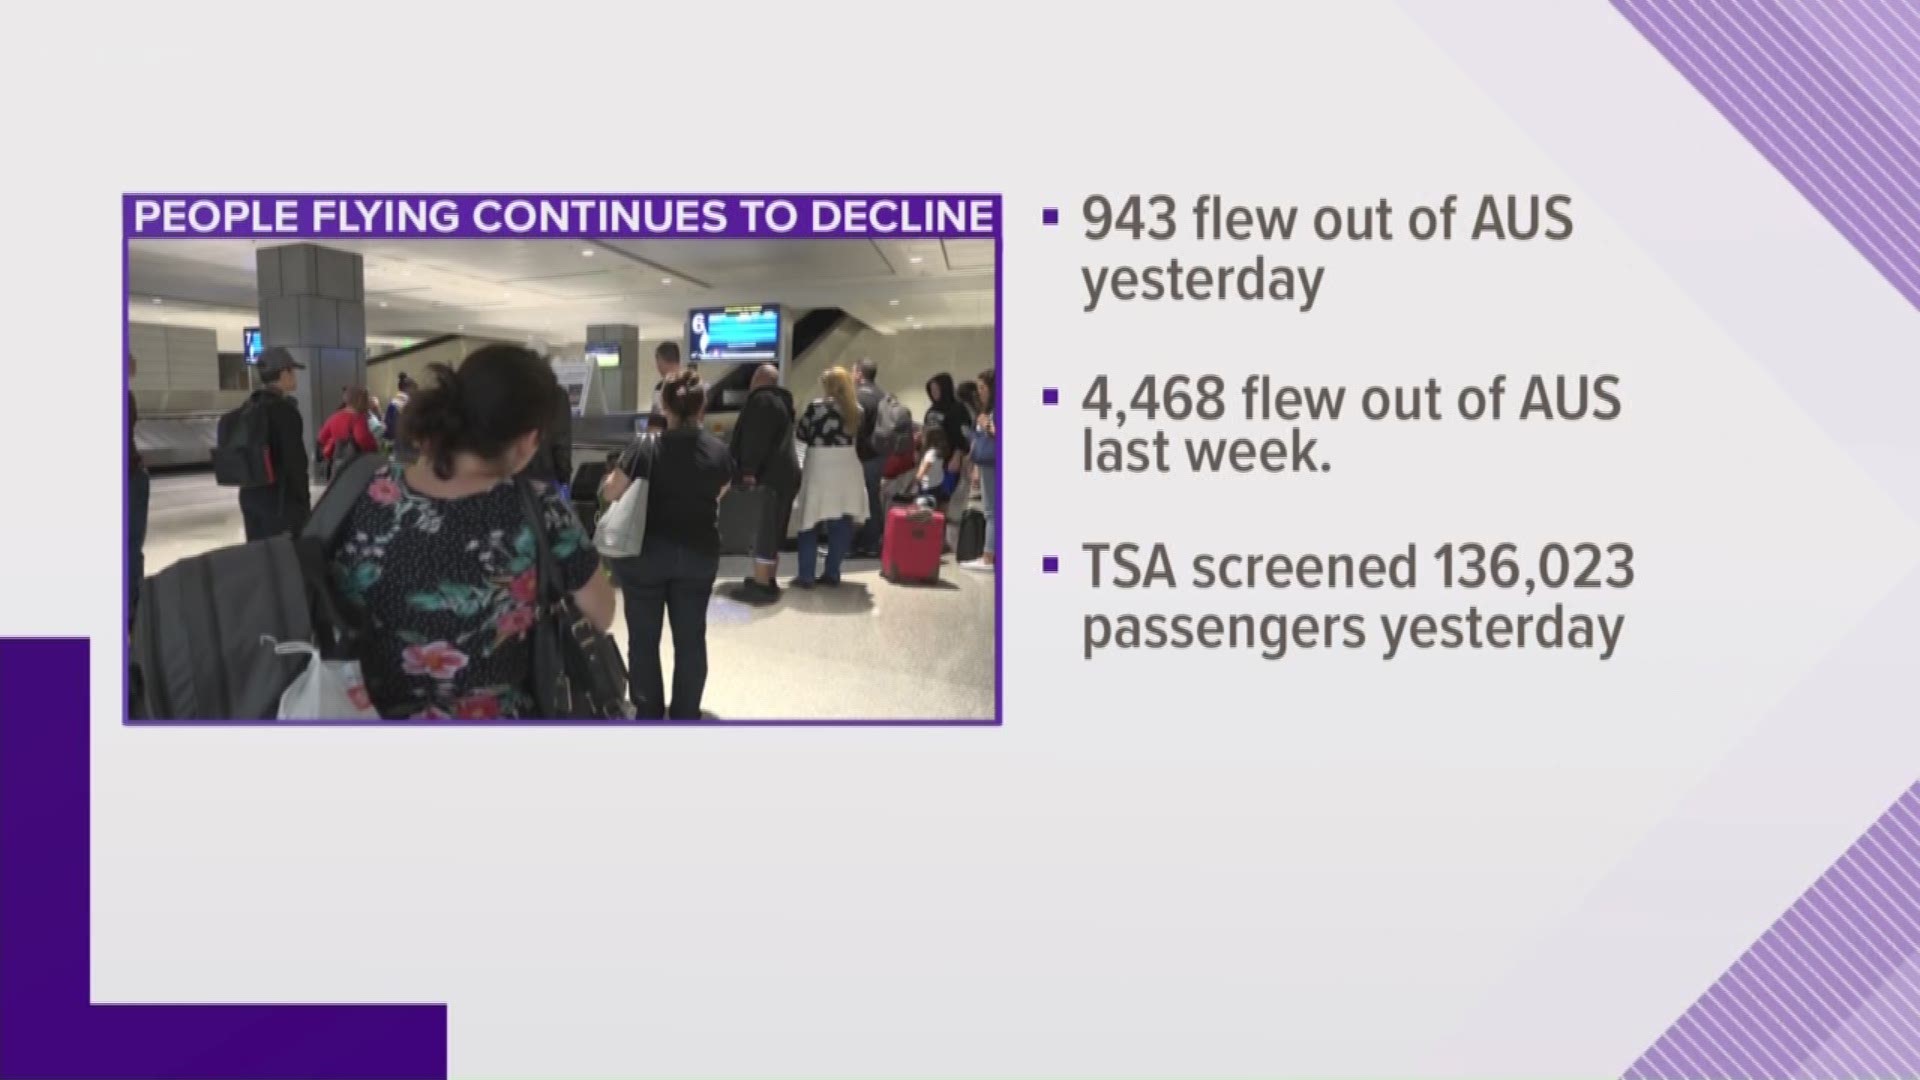 Less than 1,000 people flew out of Austin's airport on Wednesday.